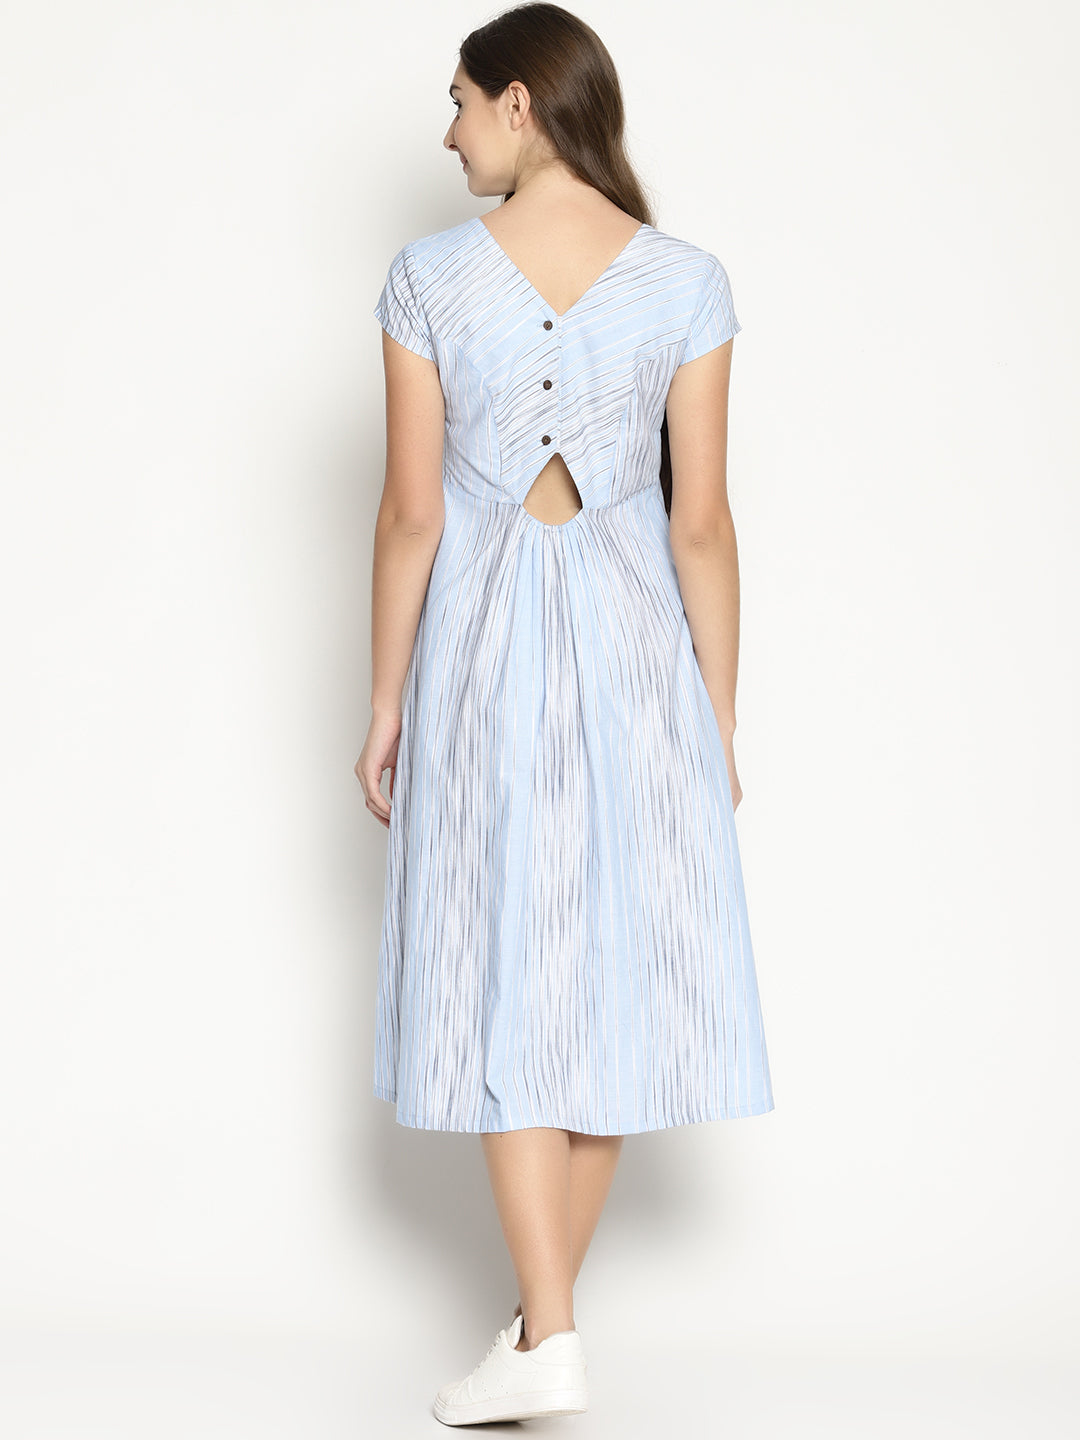 Back Open Dress - Blue Slub - Studio Y - blue and white striped outfit